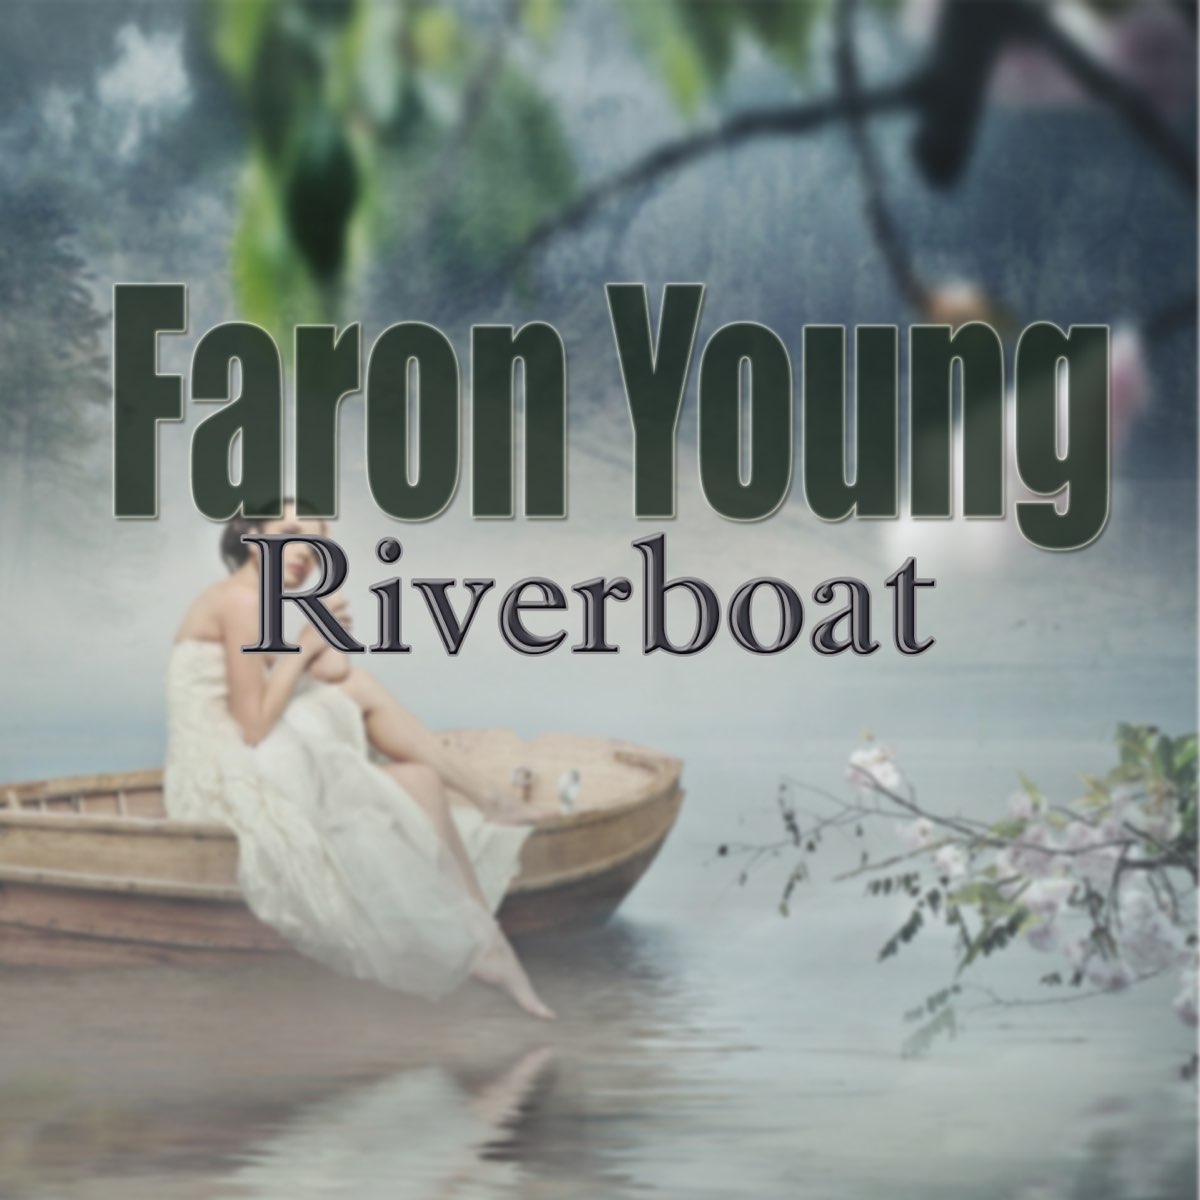 riverboat faron young